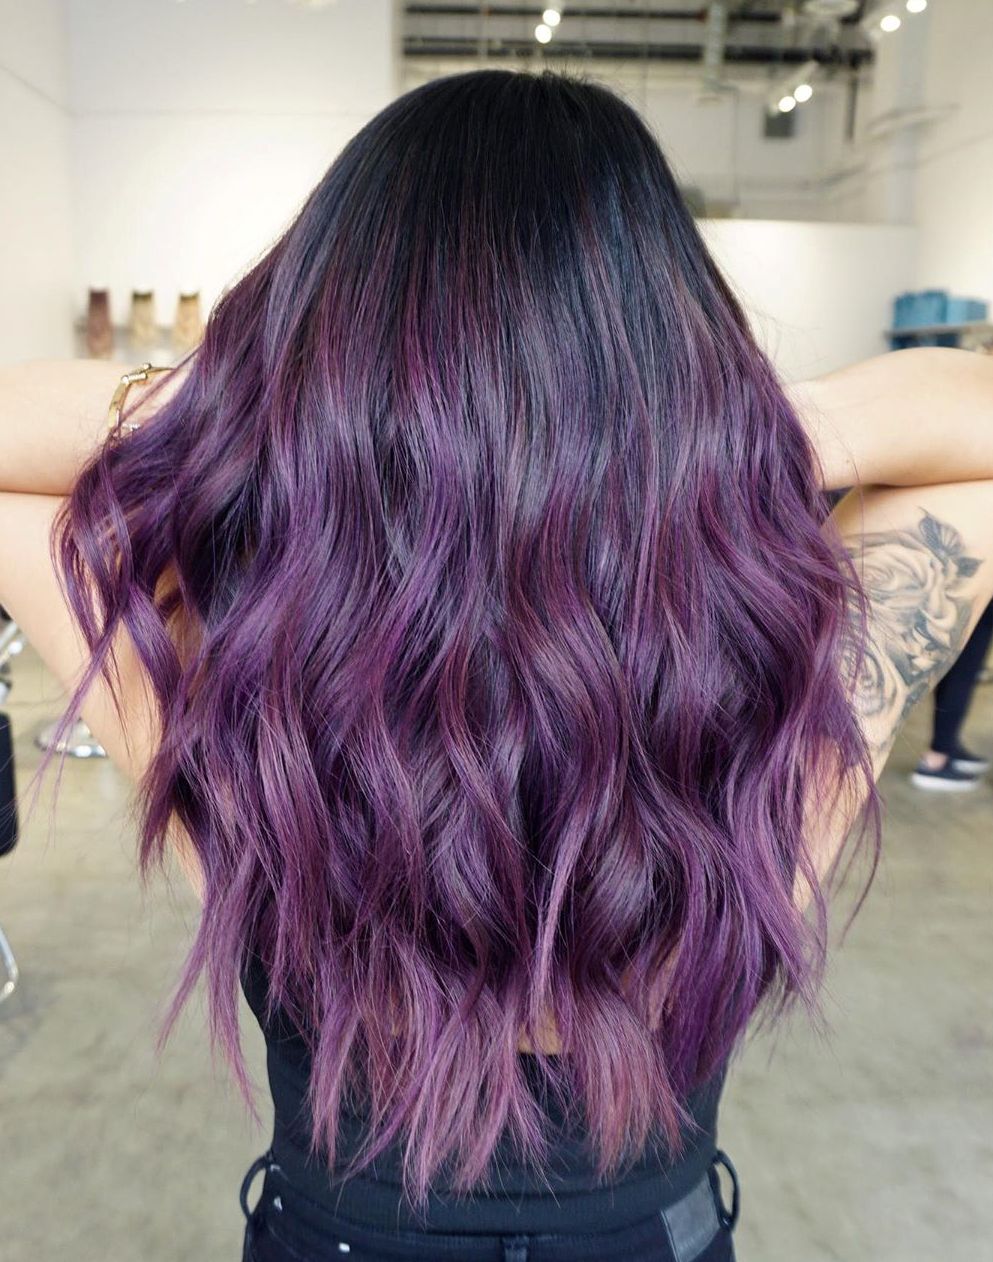 45 Hottest Balayage Hair Colors to Make Everyone Jealous in 2022